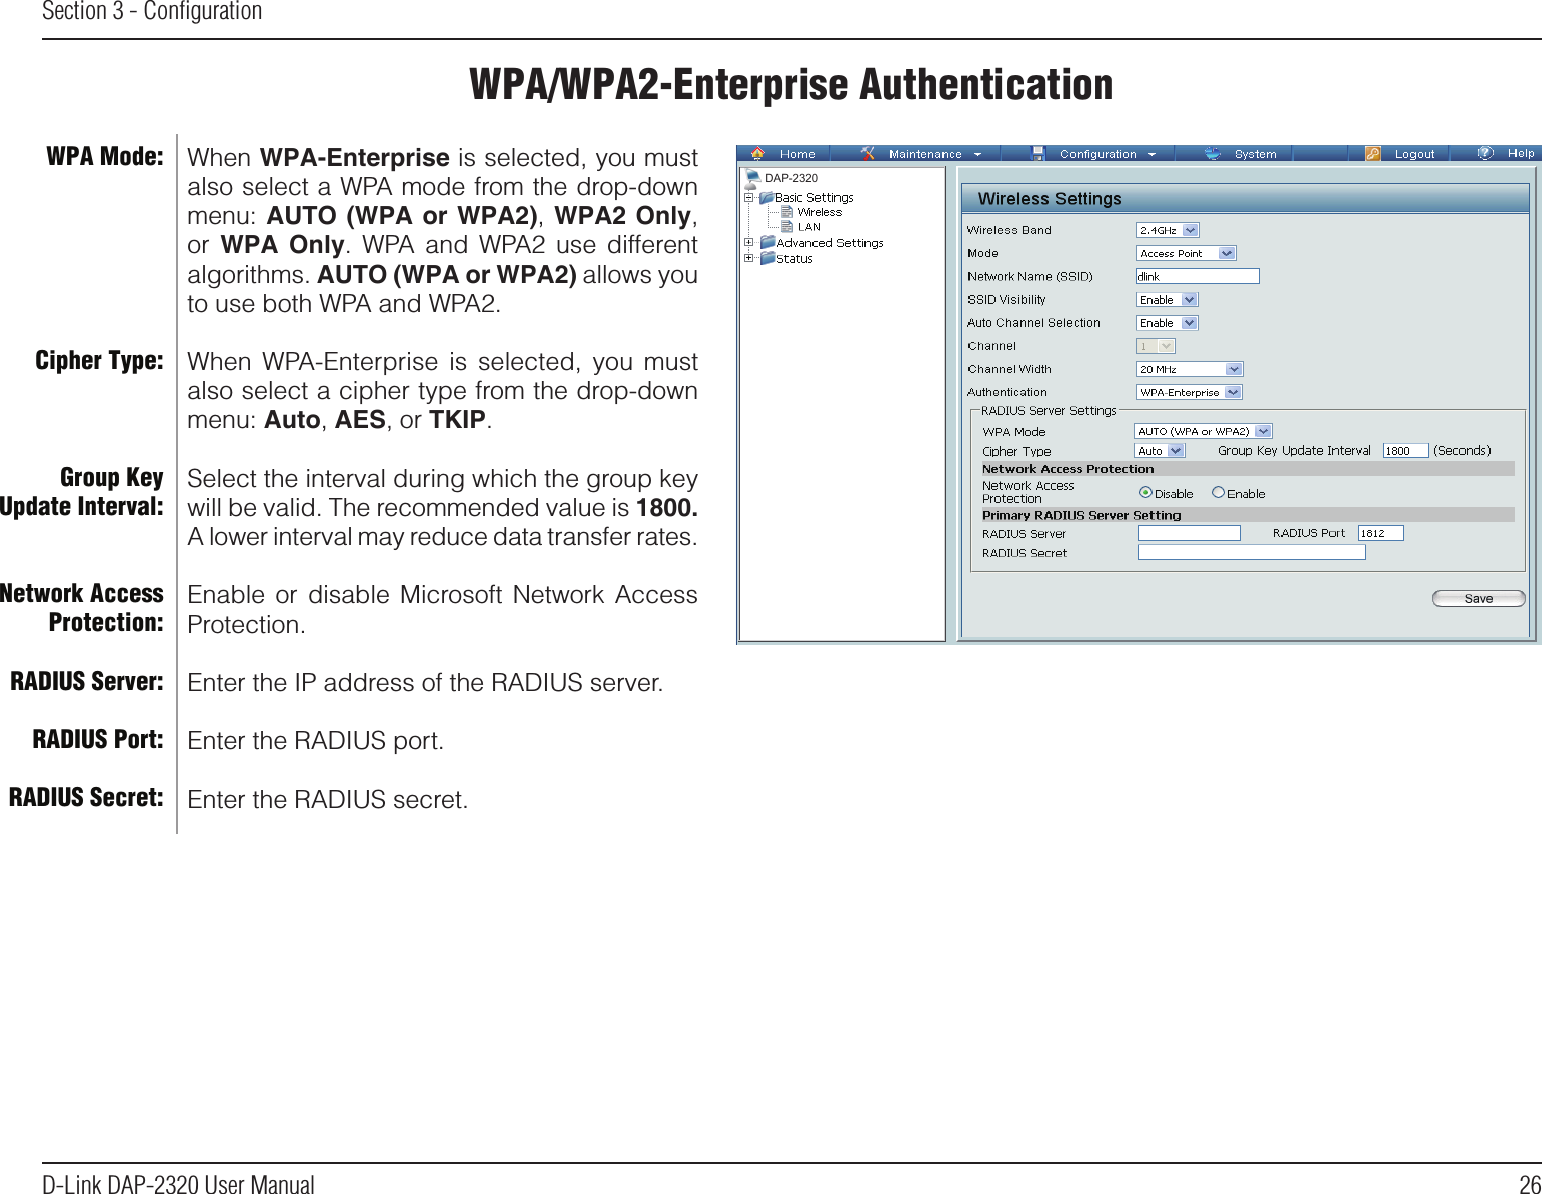 26D-Link DAP-2320 User ManualSection 3 - ConﬁgurationWPA/WPA2-Enterprise AuthenticationWhen WPA-Enterprise is selected, you must also select a WPA mode from the drop-down menu: AUTO (WPA or WPA2), WPA2 Only, or  WPA  Only.  WPA  and  WPA2  use  different algorithms. AUTO (WPA or WPA2) allows you to use both WPA and WPA2. When  WPA-Enterprise  is  selected,  you  must also select a cipher type from the drop-down menu: Auto, AES, or TKIP.Select the interval during which the group key will be valid. The recommended value is 1800. A lower interval may reduce data transfer rates.Enable  or  disable  Microsoft Network  Access Protection.Enter the IP address of the RADIUS server.Enter the RADIUS port.Enter the RADIUS secret.WPA Mode: Cipher Type:Group Key Update Interval:Network Access Protection:RADIUS Server:RADIUS Port:RADIUS Secret:DAP-2320